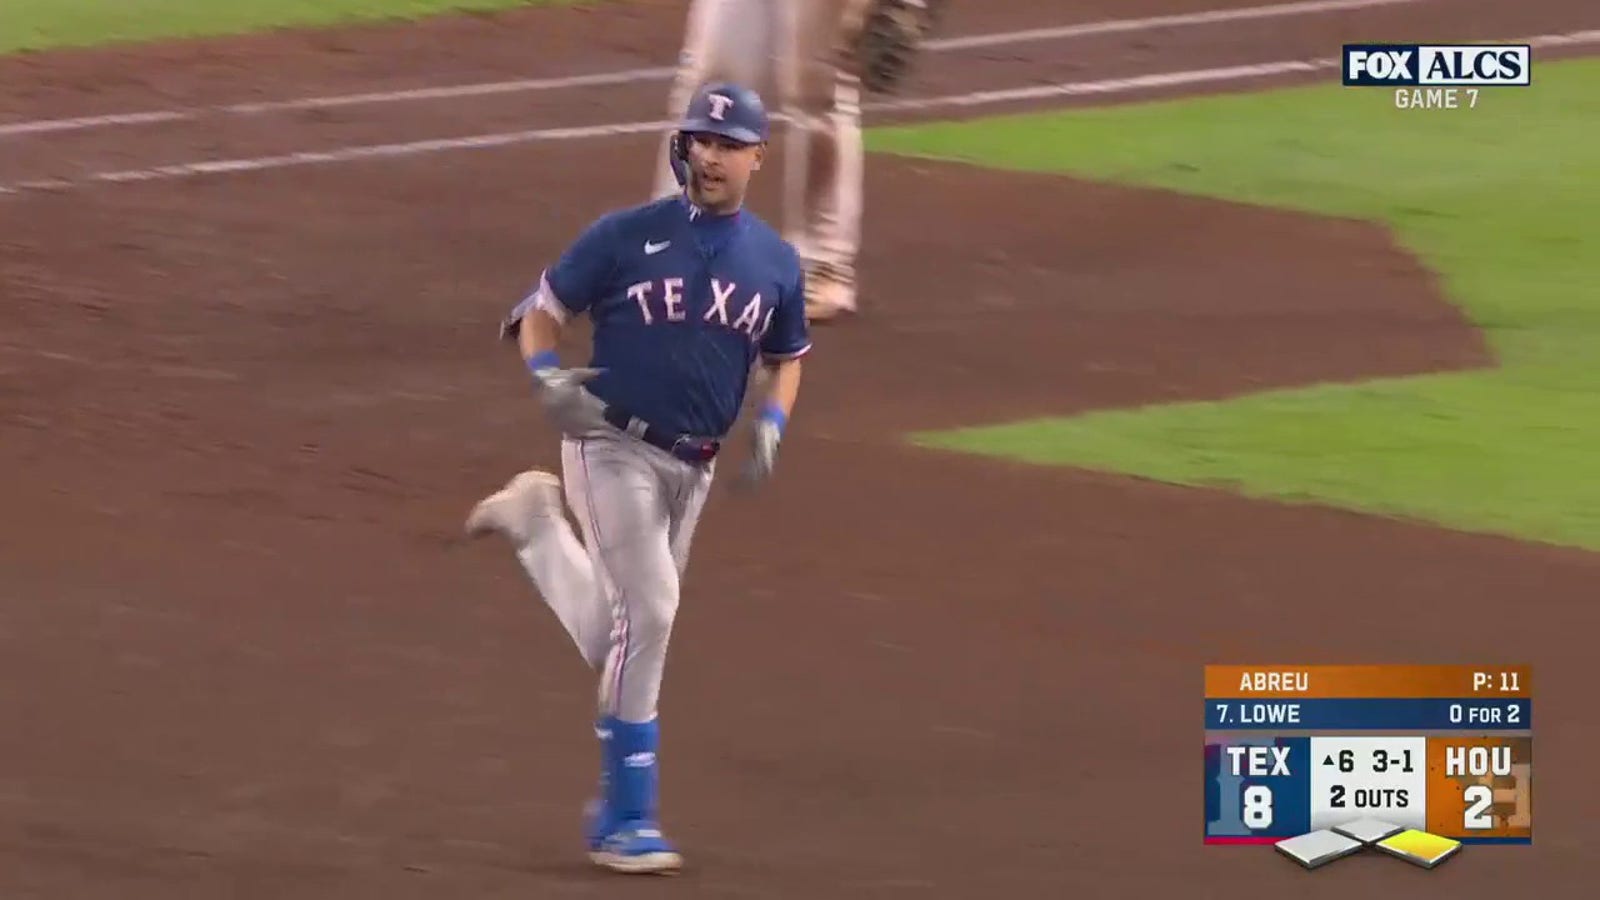 Nathaniel Lowe crushes a two-run homer, extending Rangers' lead vs. Astros